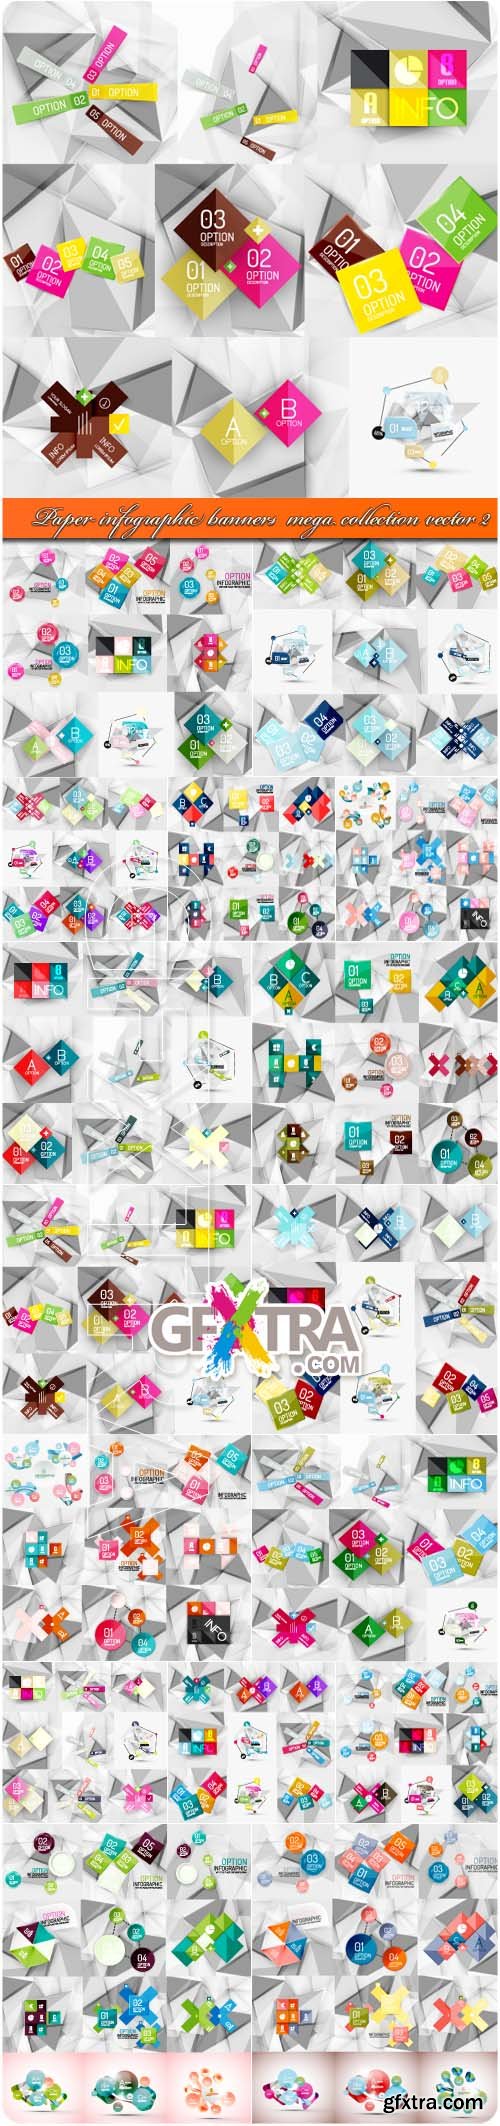 Paper infographic banners mega collection vector 2